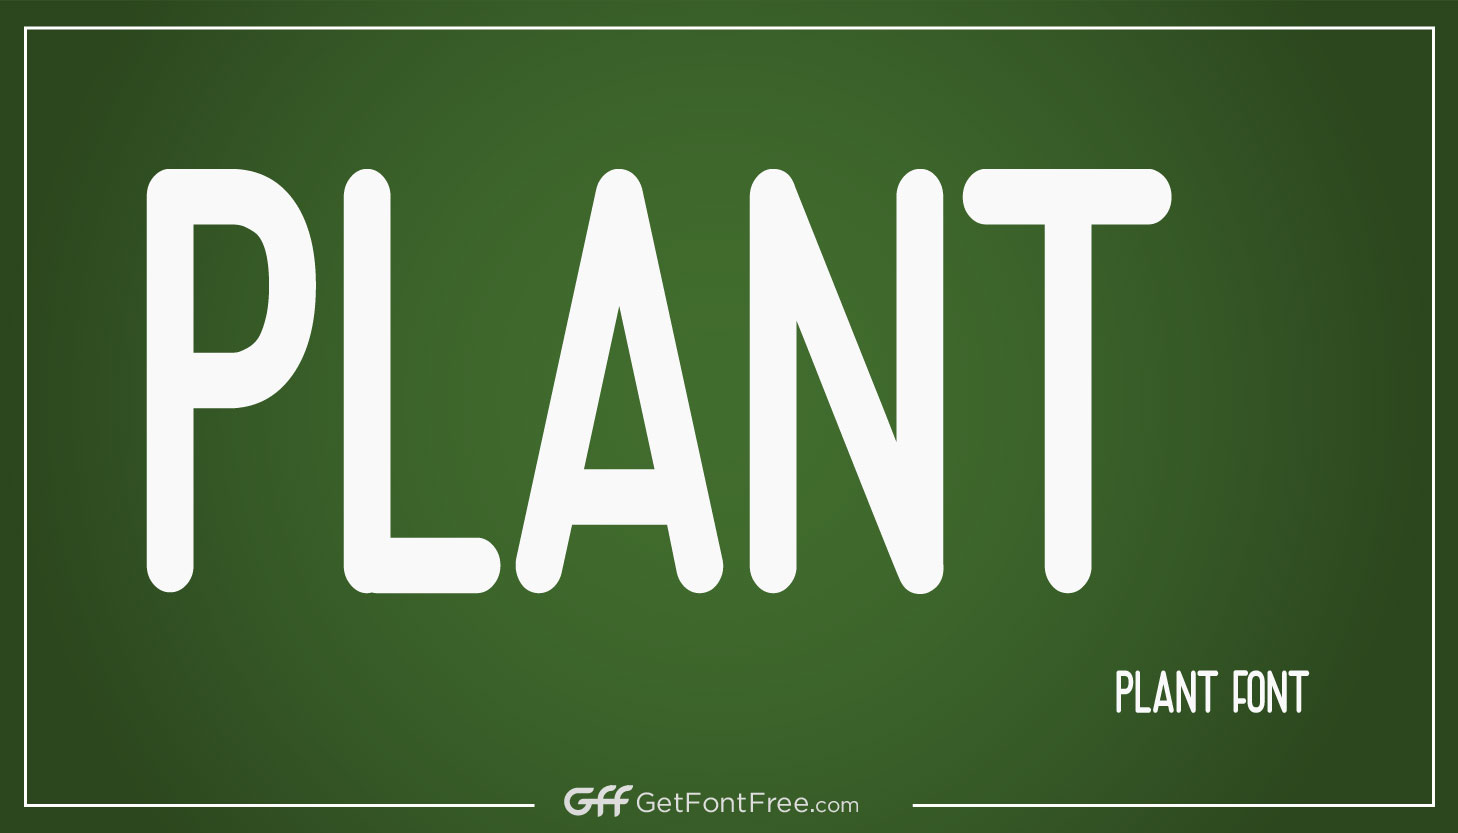 A Plant Font is a type of font that is designed to resemble plants, leaves, or other elements of nature. Plant fonts can be used for a variety of purposes, such as in logos, graphics, and websites. They are often used to convey a sense of nature, eco-friendliness, or a connection to the outdoors. There are many different plant fonts available, ranging from more realistic and detailed designs to more stylized and abstract versions. Some plant fonts are designed to look like specific types of plants, while others are more general and can be used to represent a wide range of plants.